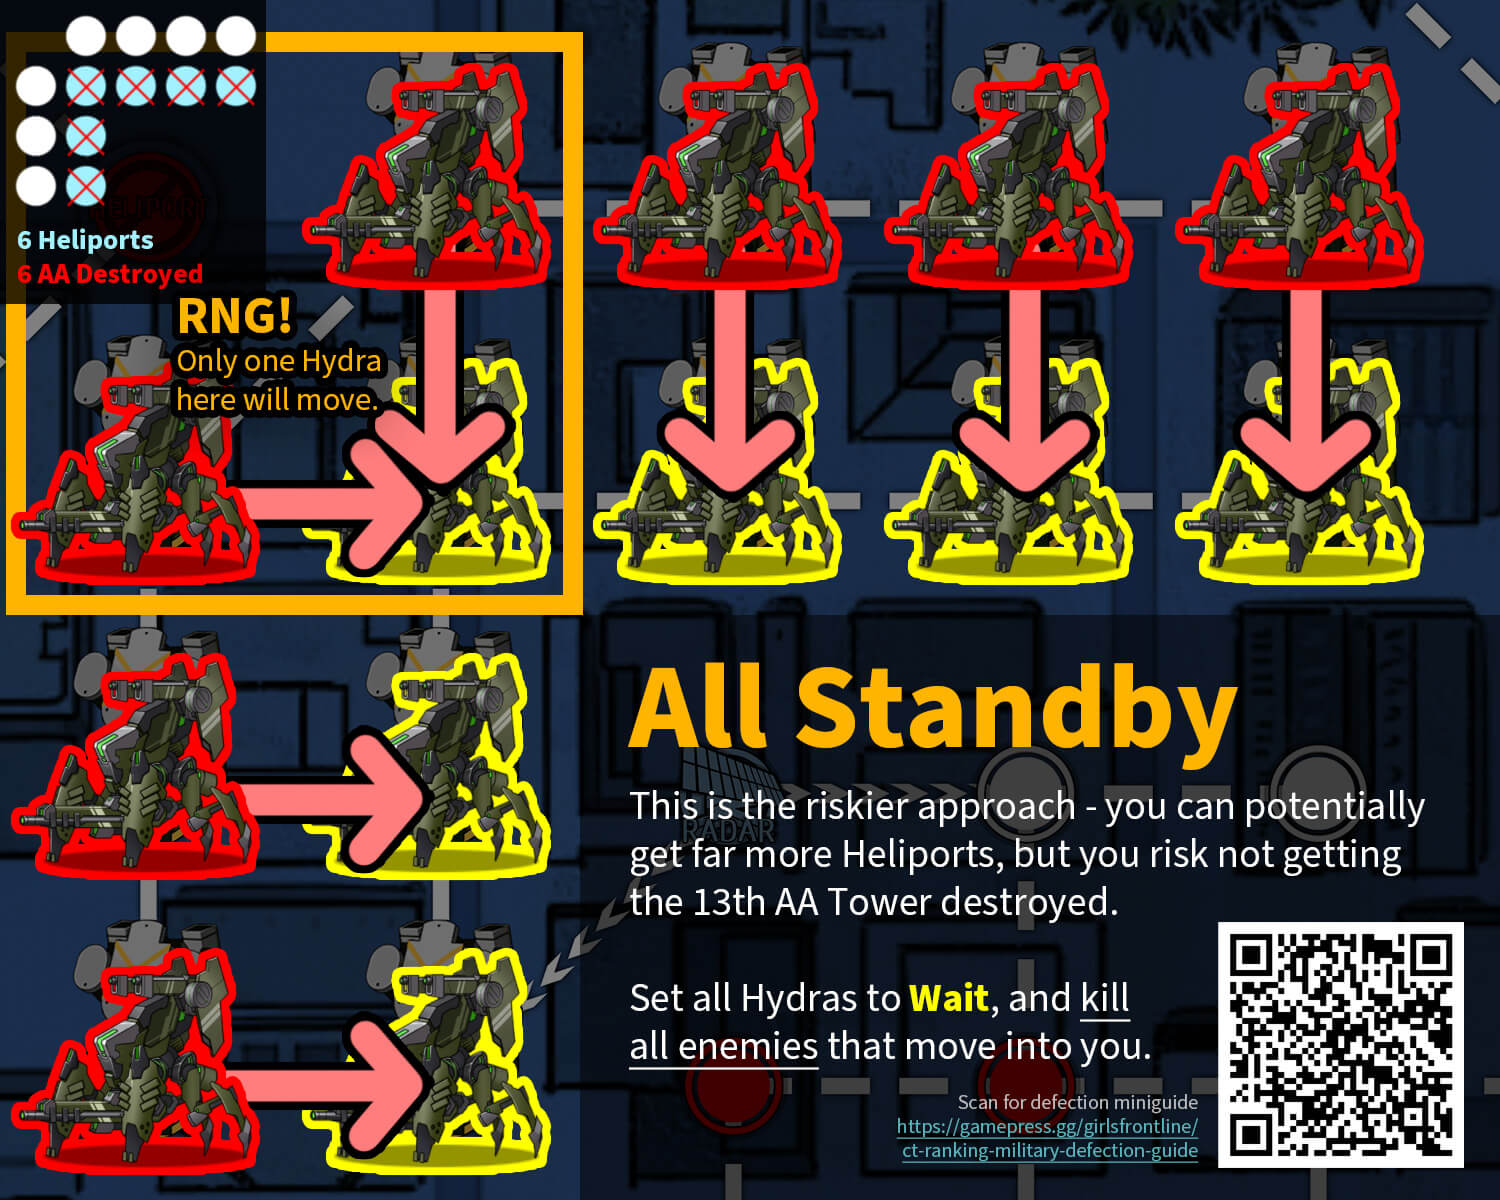 Inner Defection "All Standby" infographic